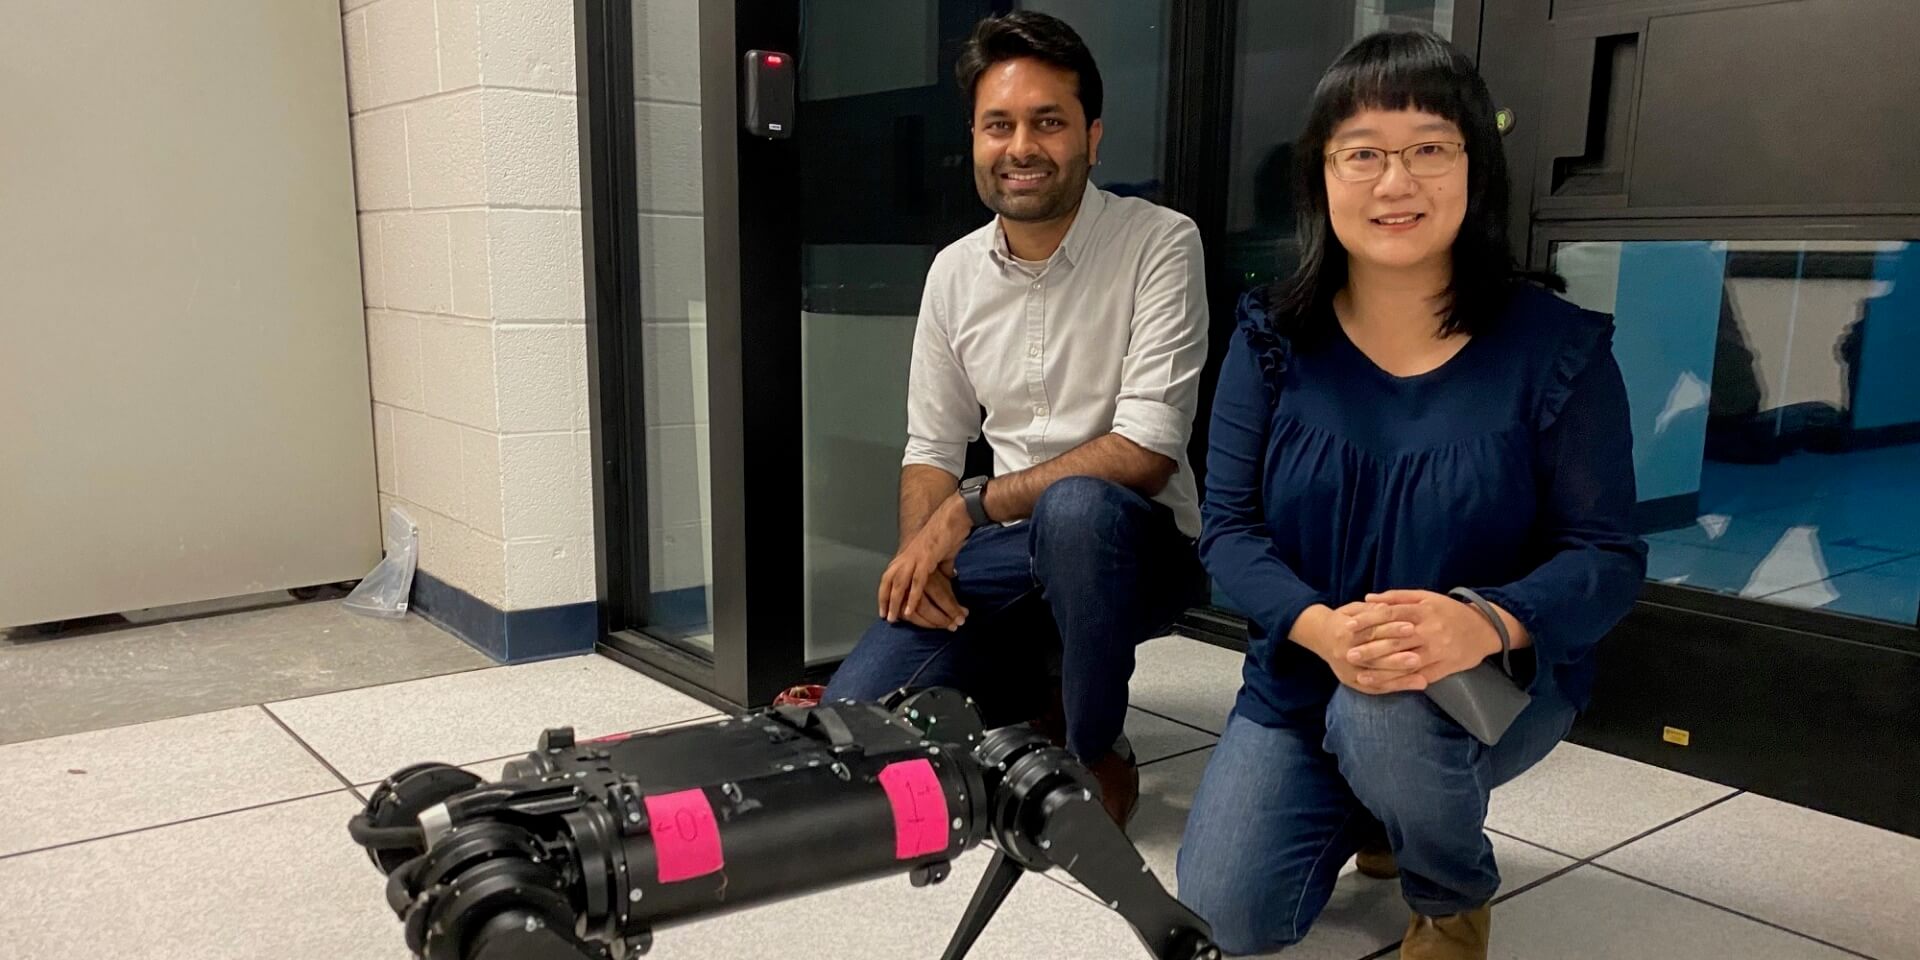 Somil Bansal and Feifei Qian outside a lab in the basement of the Hughes Aircraft Electrical Engineering Center, where Prof. Qian programs legged robots to adjust to various terrain when walking. Her work and Prof. Bansal's robotics work share commonalities. (USC Photo/Landon Hall)